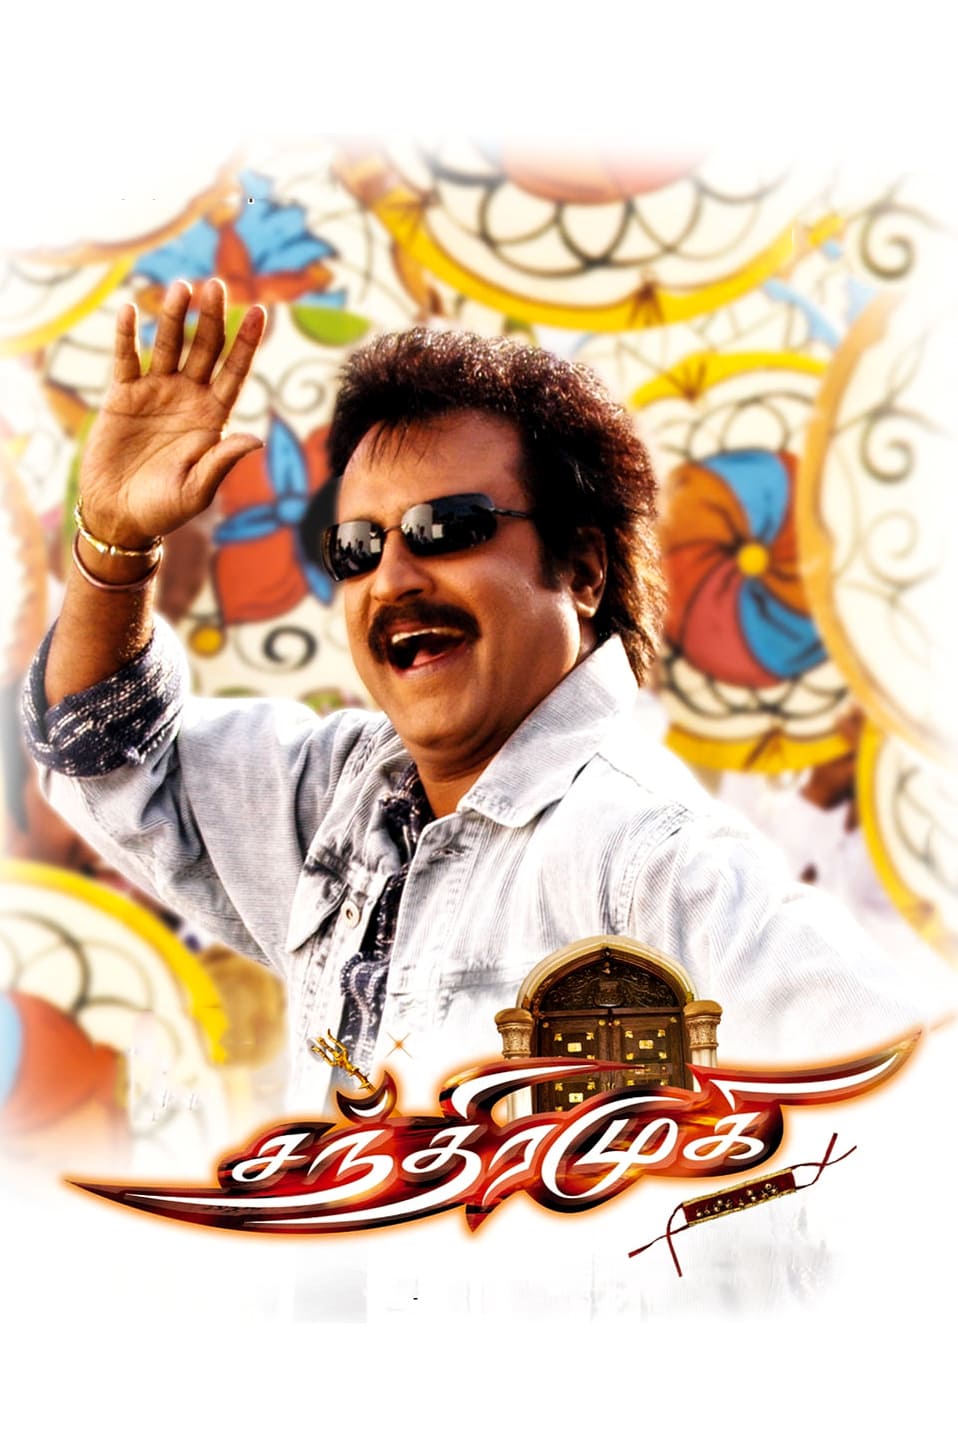 Poster for the movie "Chandramukhi"